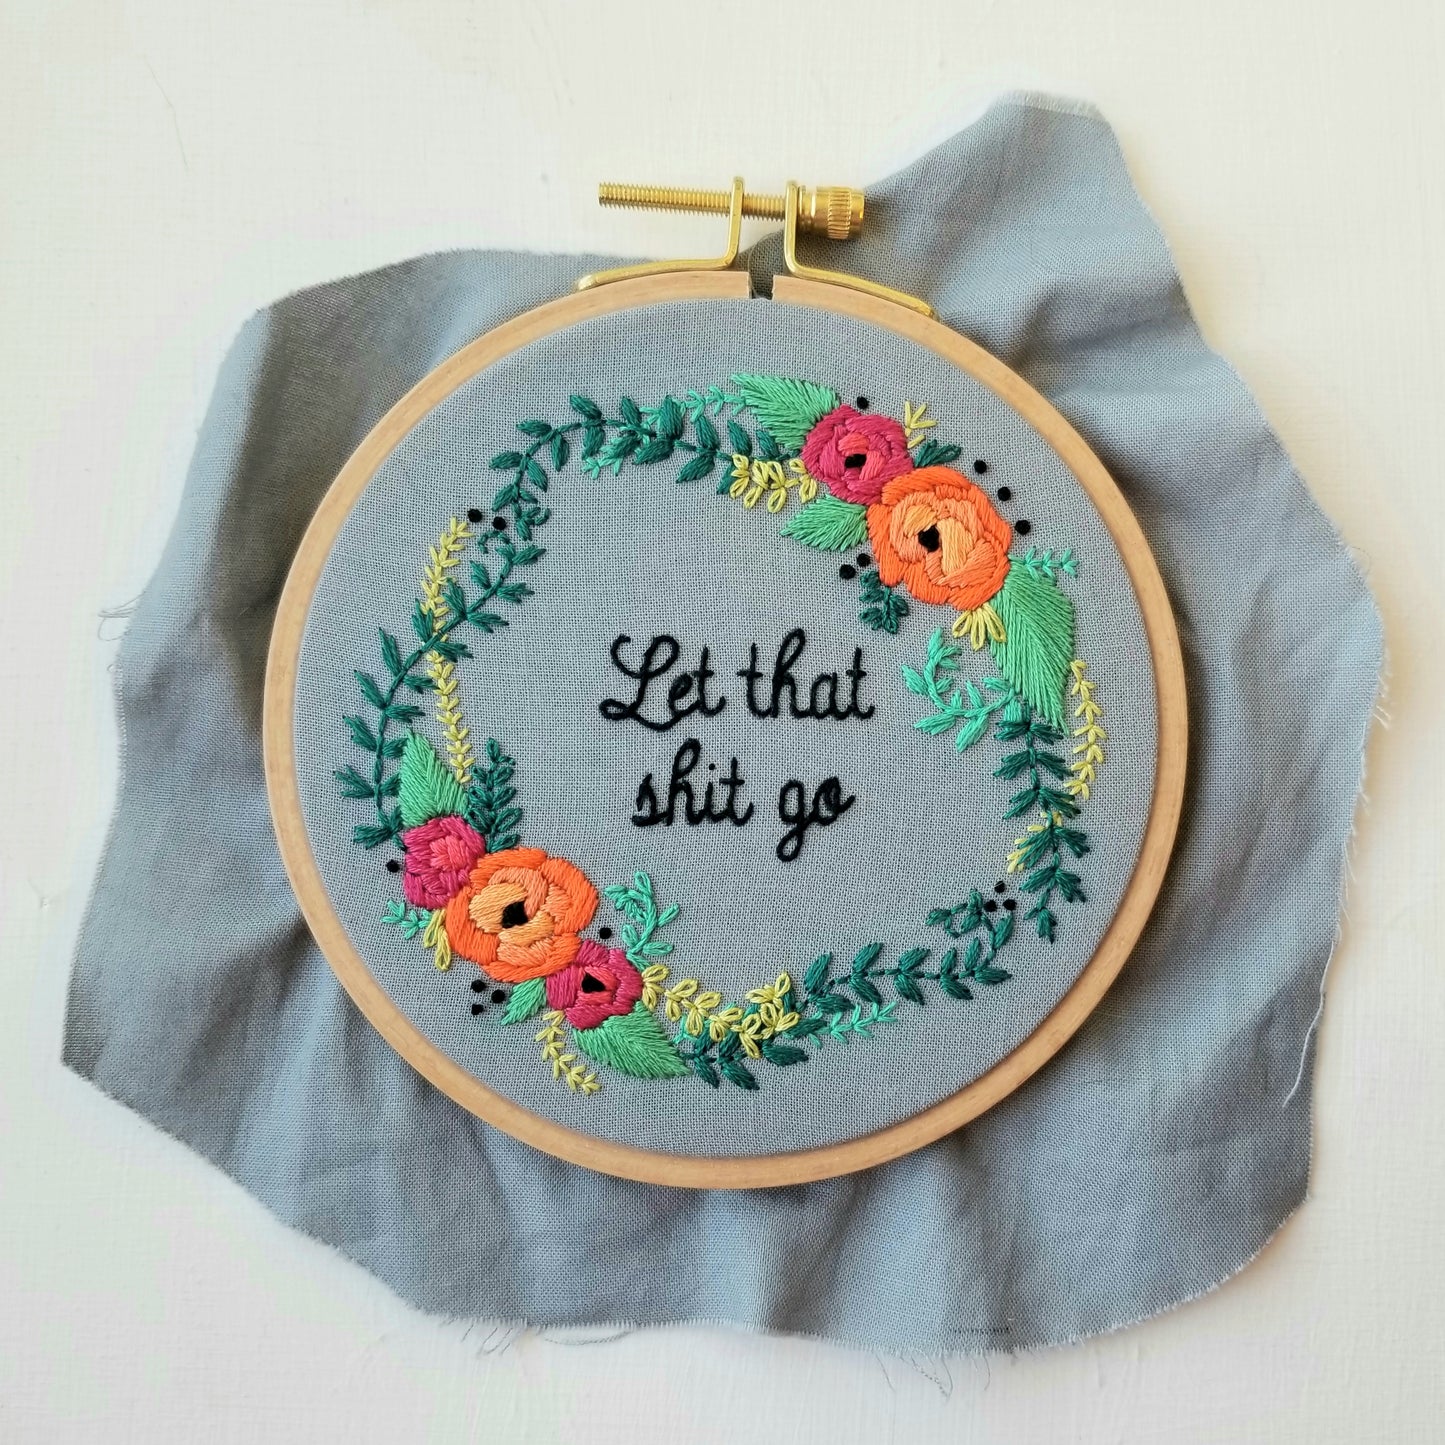 "Let that $h!t go" Embroidery Kit